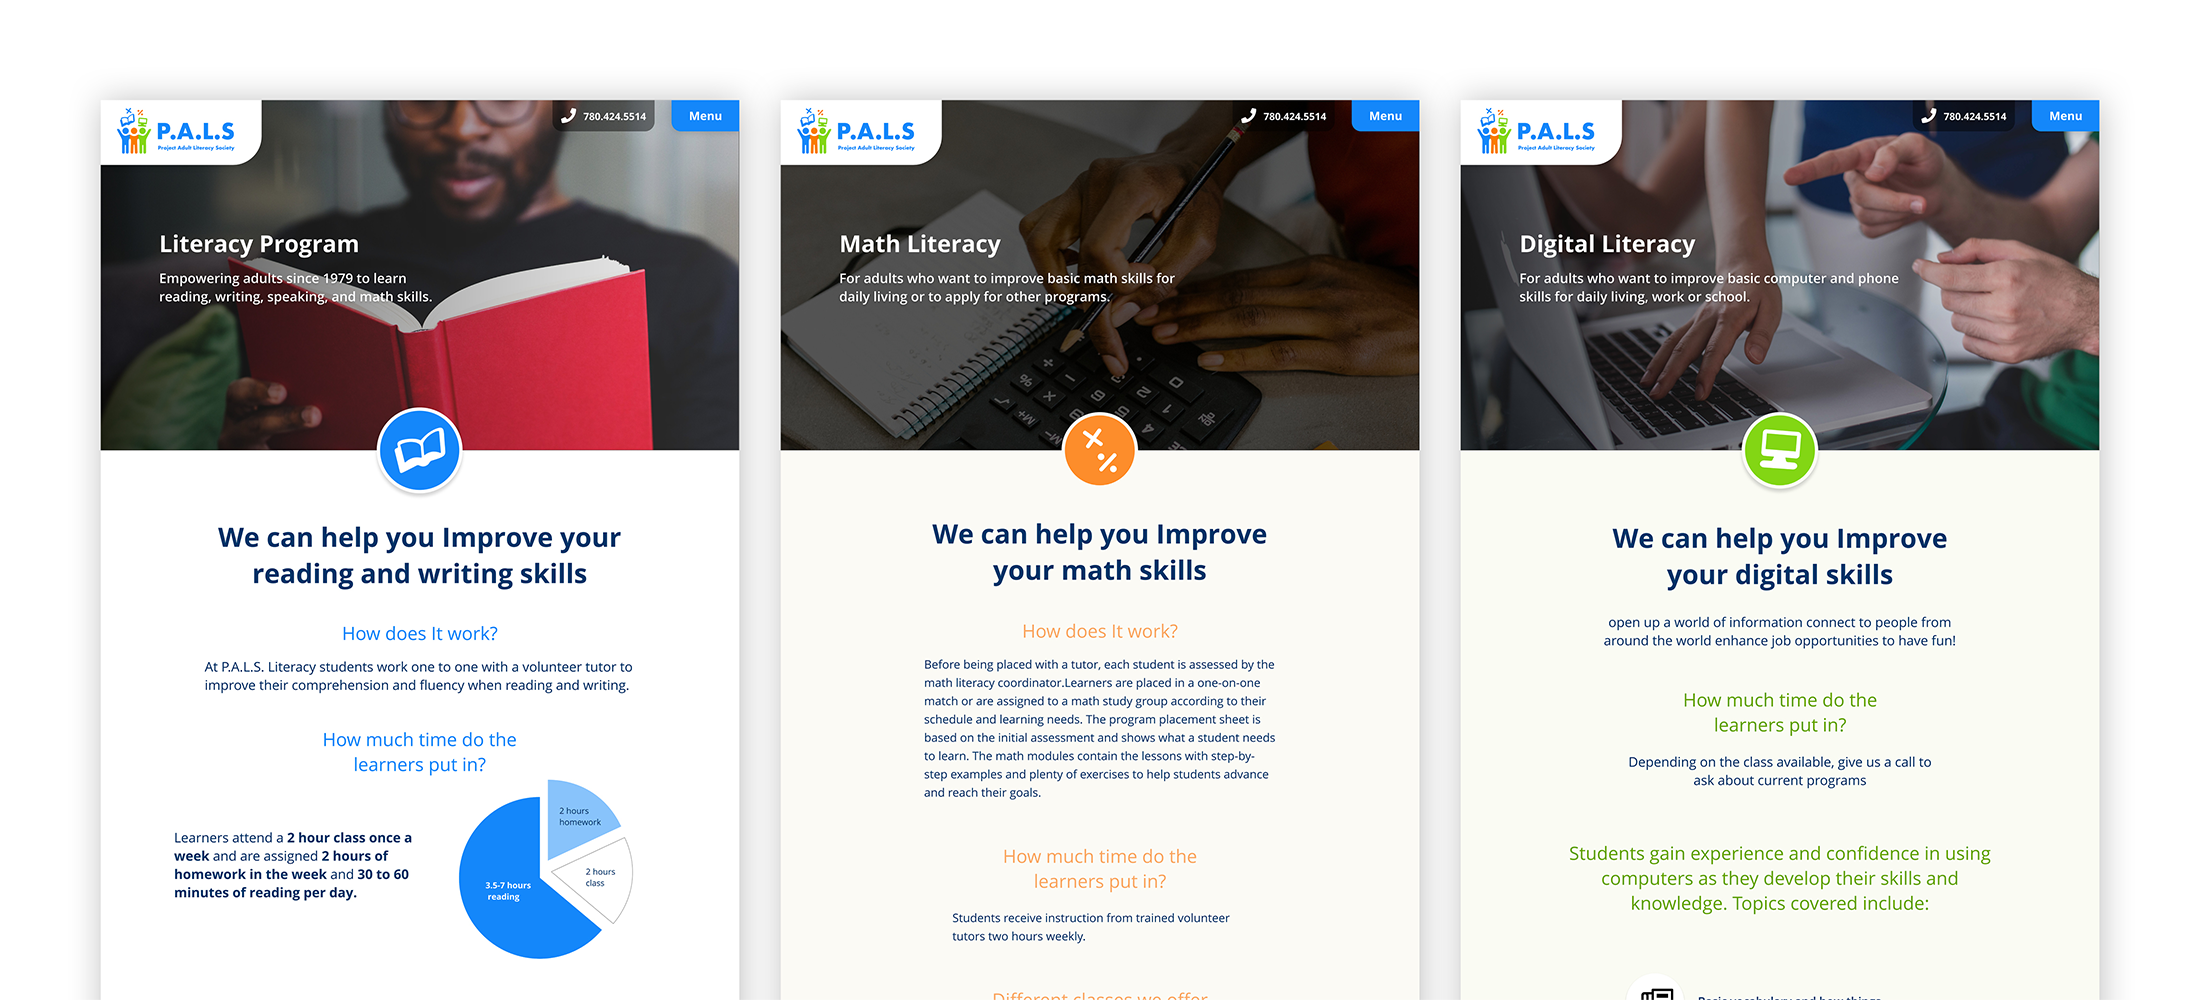 PALS brand and website redesign 5